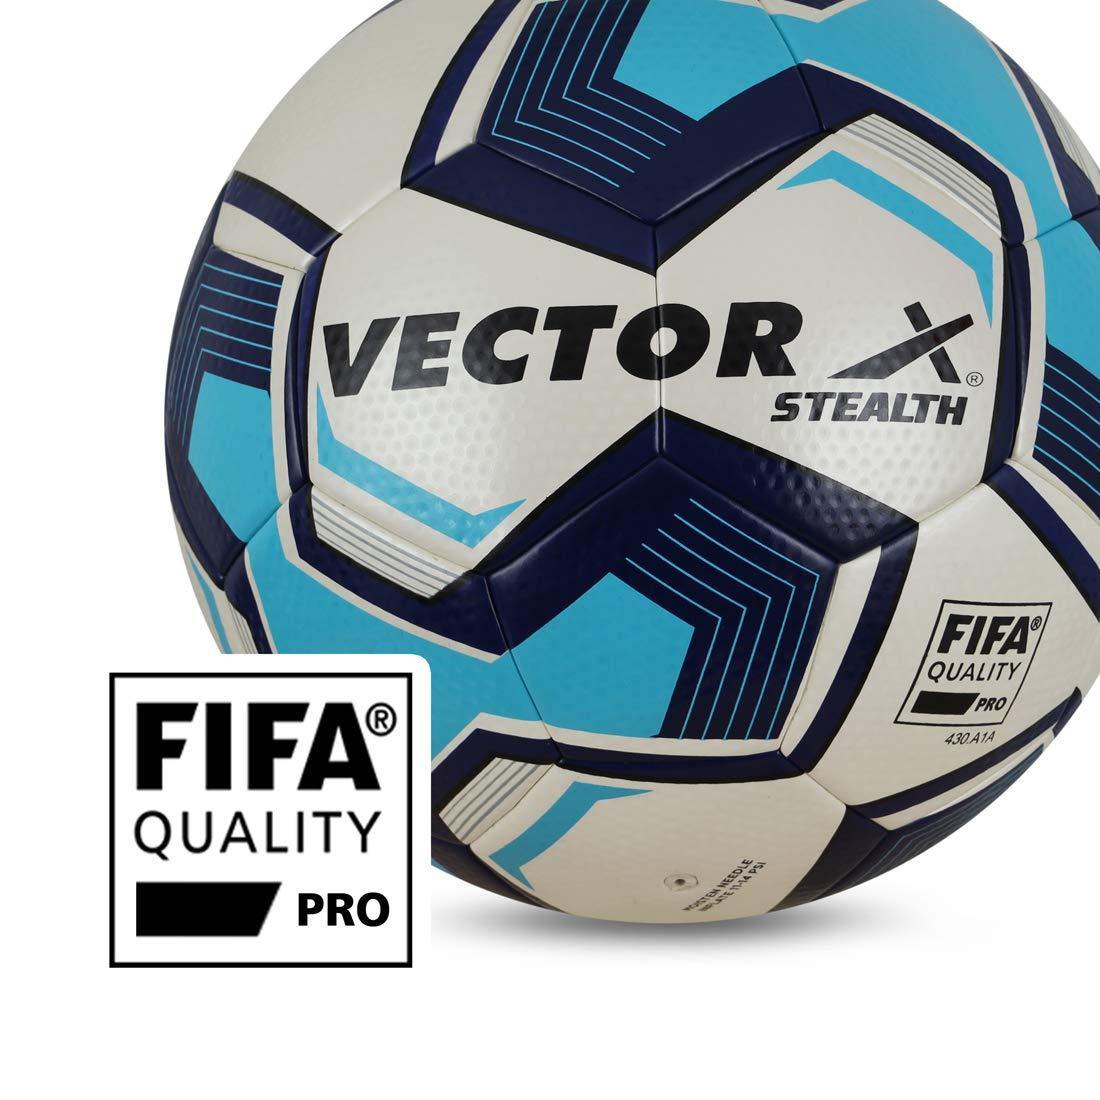 Vector X STEALTH Synthetic Thermo Bonded FIFA Quality PRO Football, Size 5 (White-Blue) - Best Price online Prokicksports.com